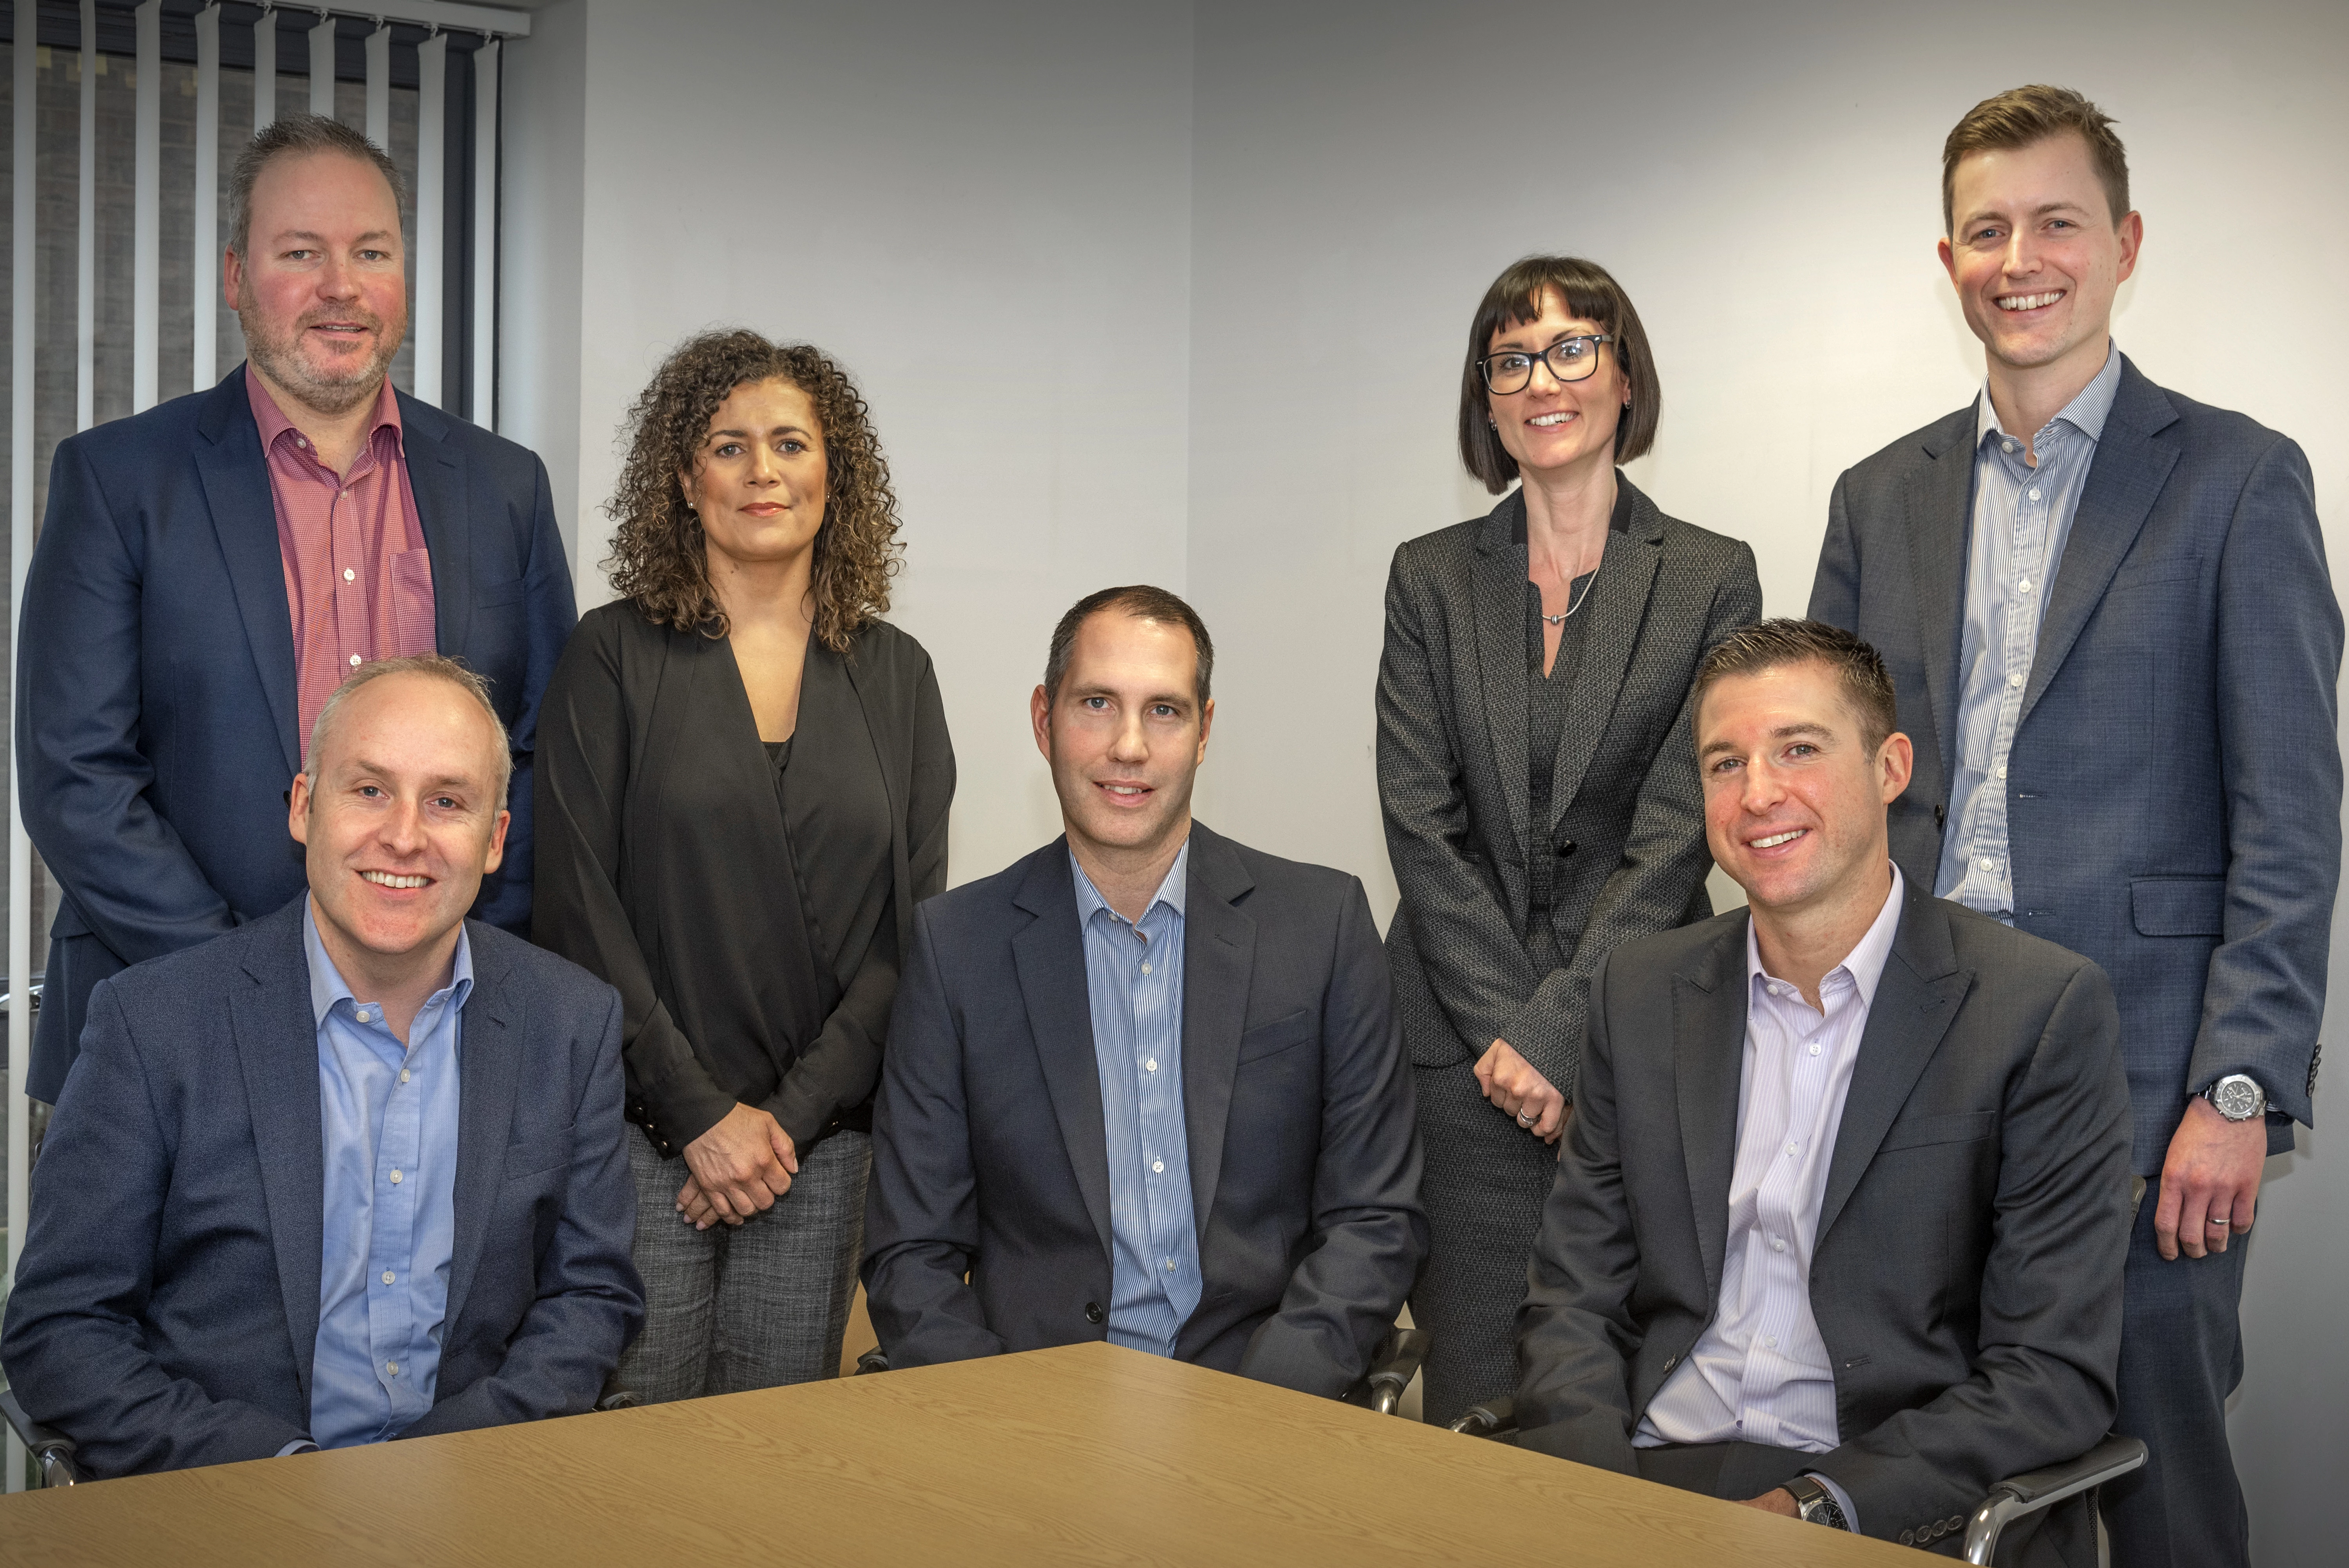 The delighted Identity Consult board - (seated, from left), Matty Pendergast, Mark Doherty, Pete Johnson; (standing), Mark Williams, Michelle Merry, Alex Atkinson, Andrew Milnes.